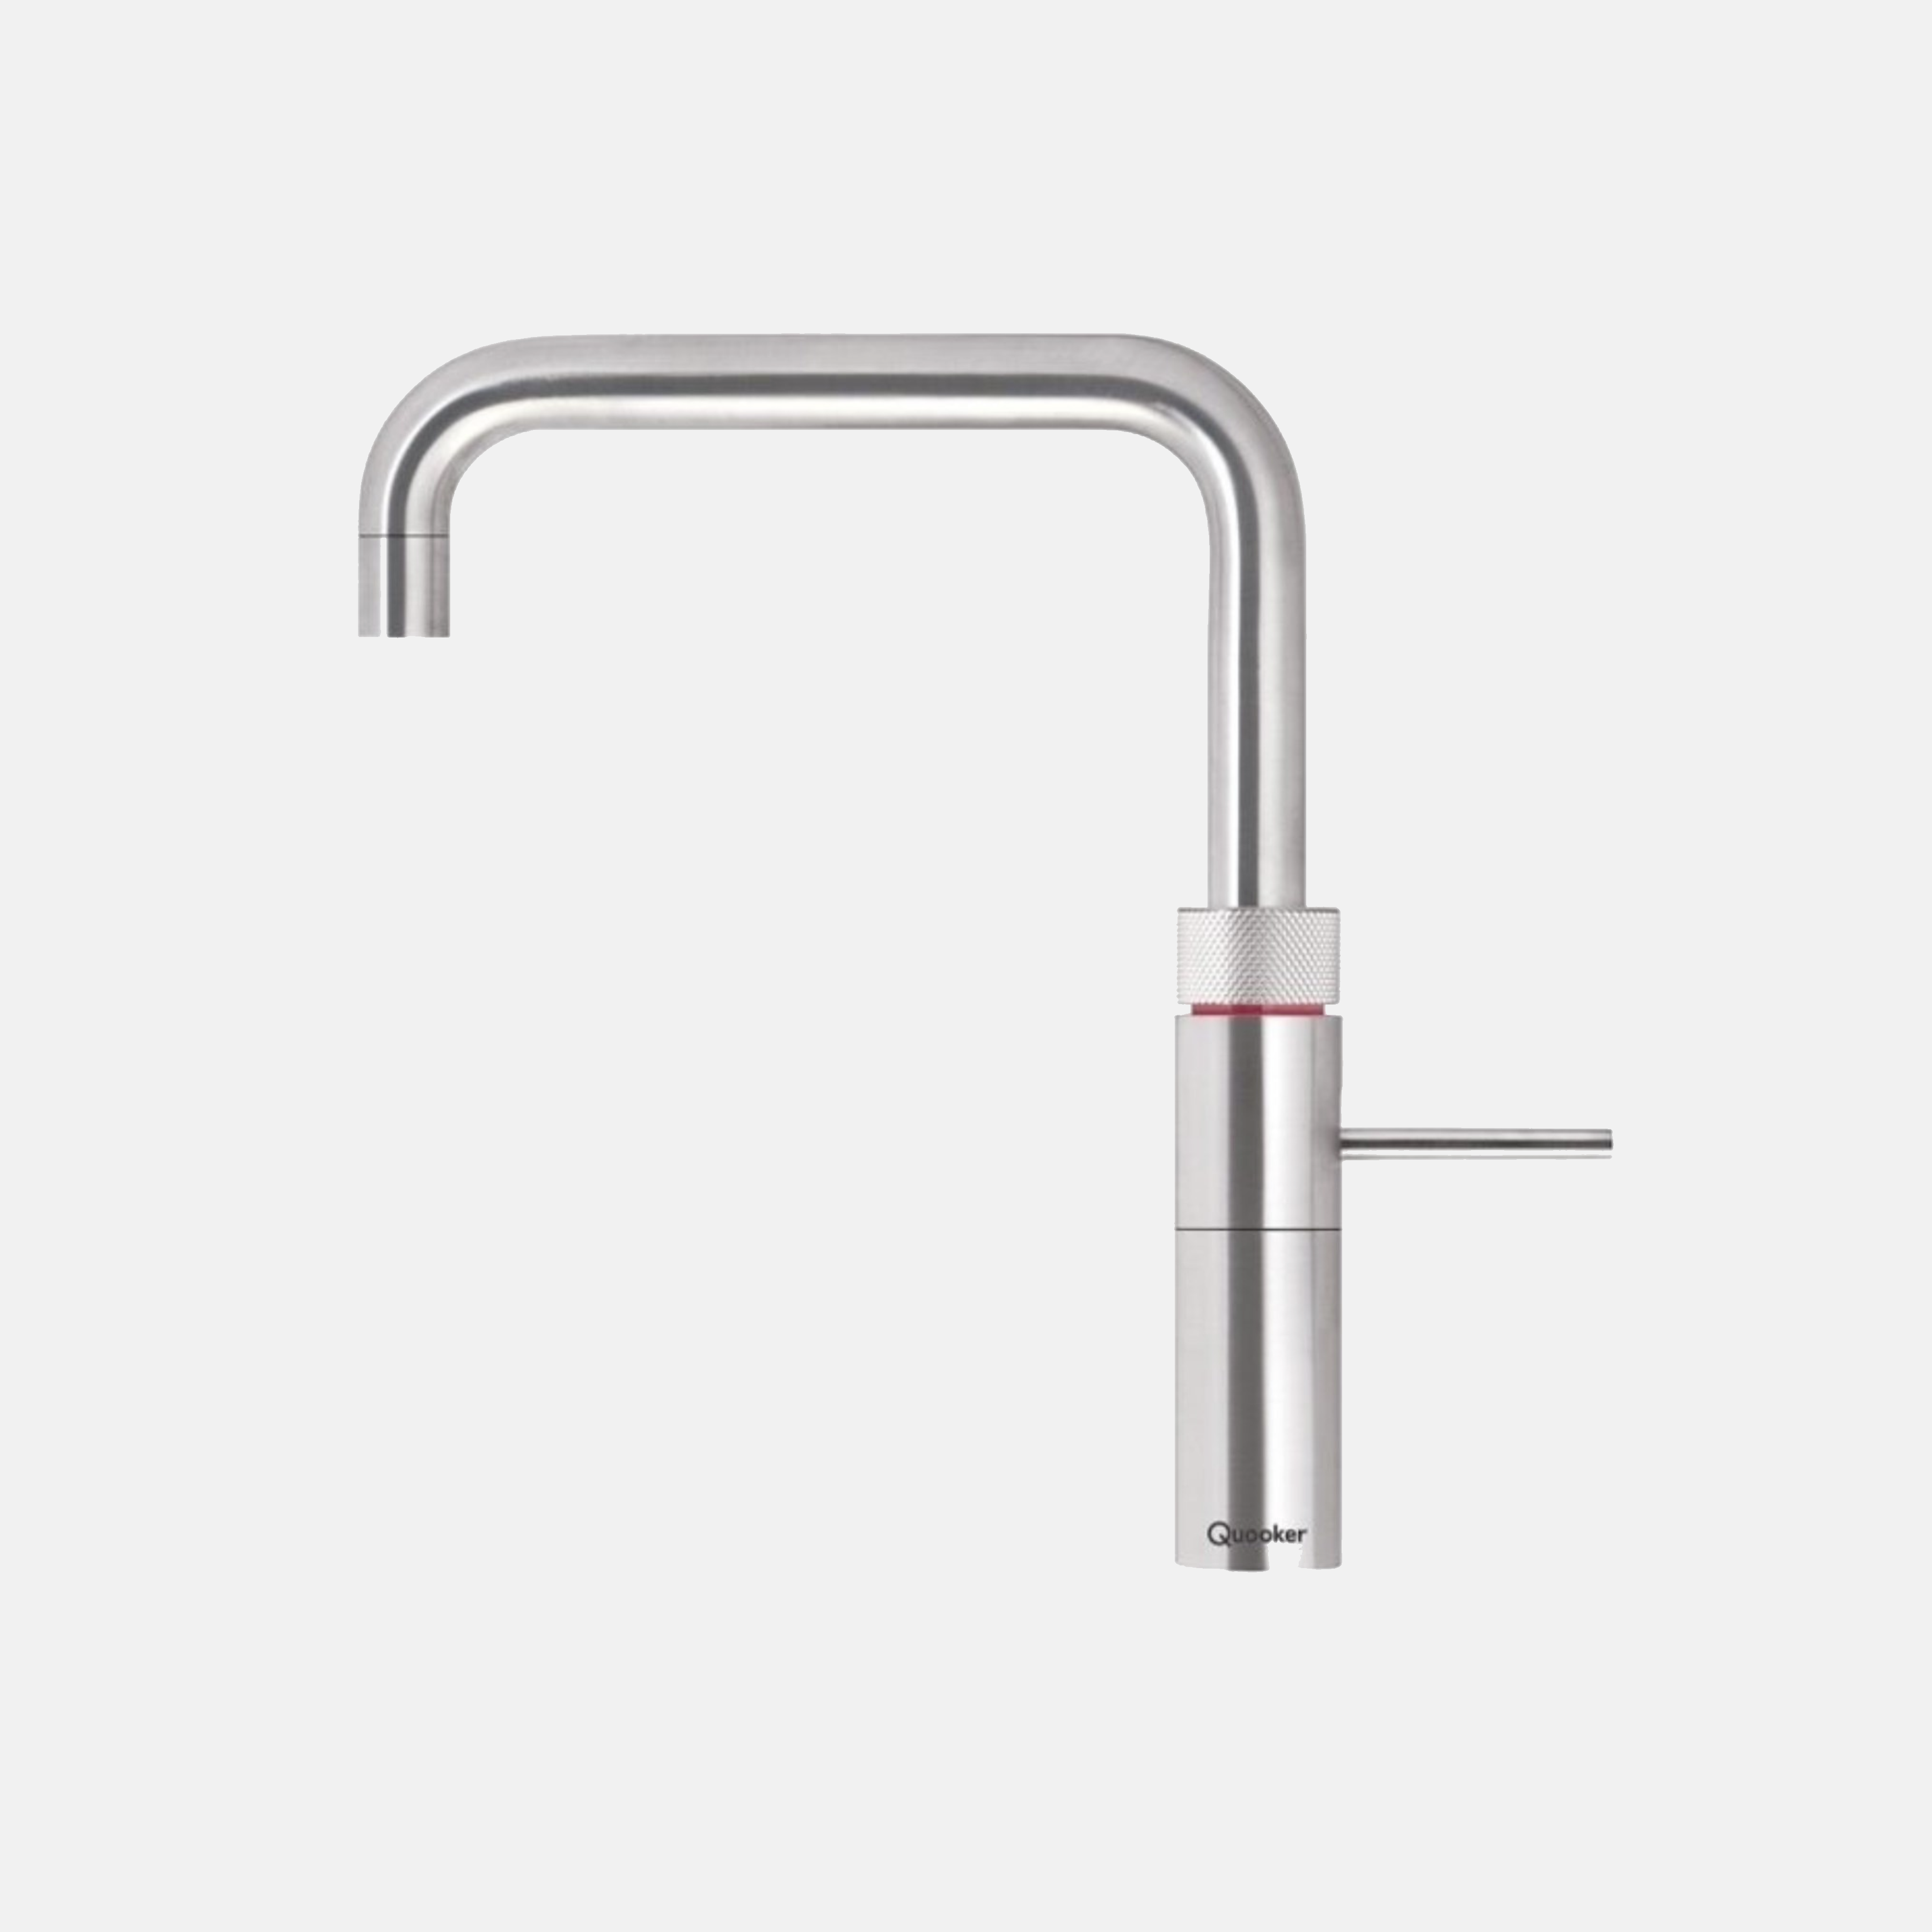 schedel Koe syndroom Quooker Fusion Square - KettleTaps